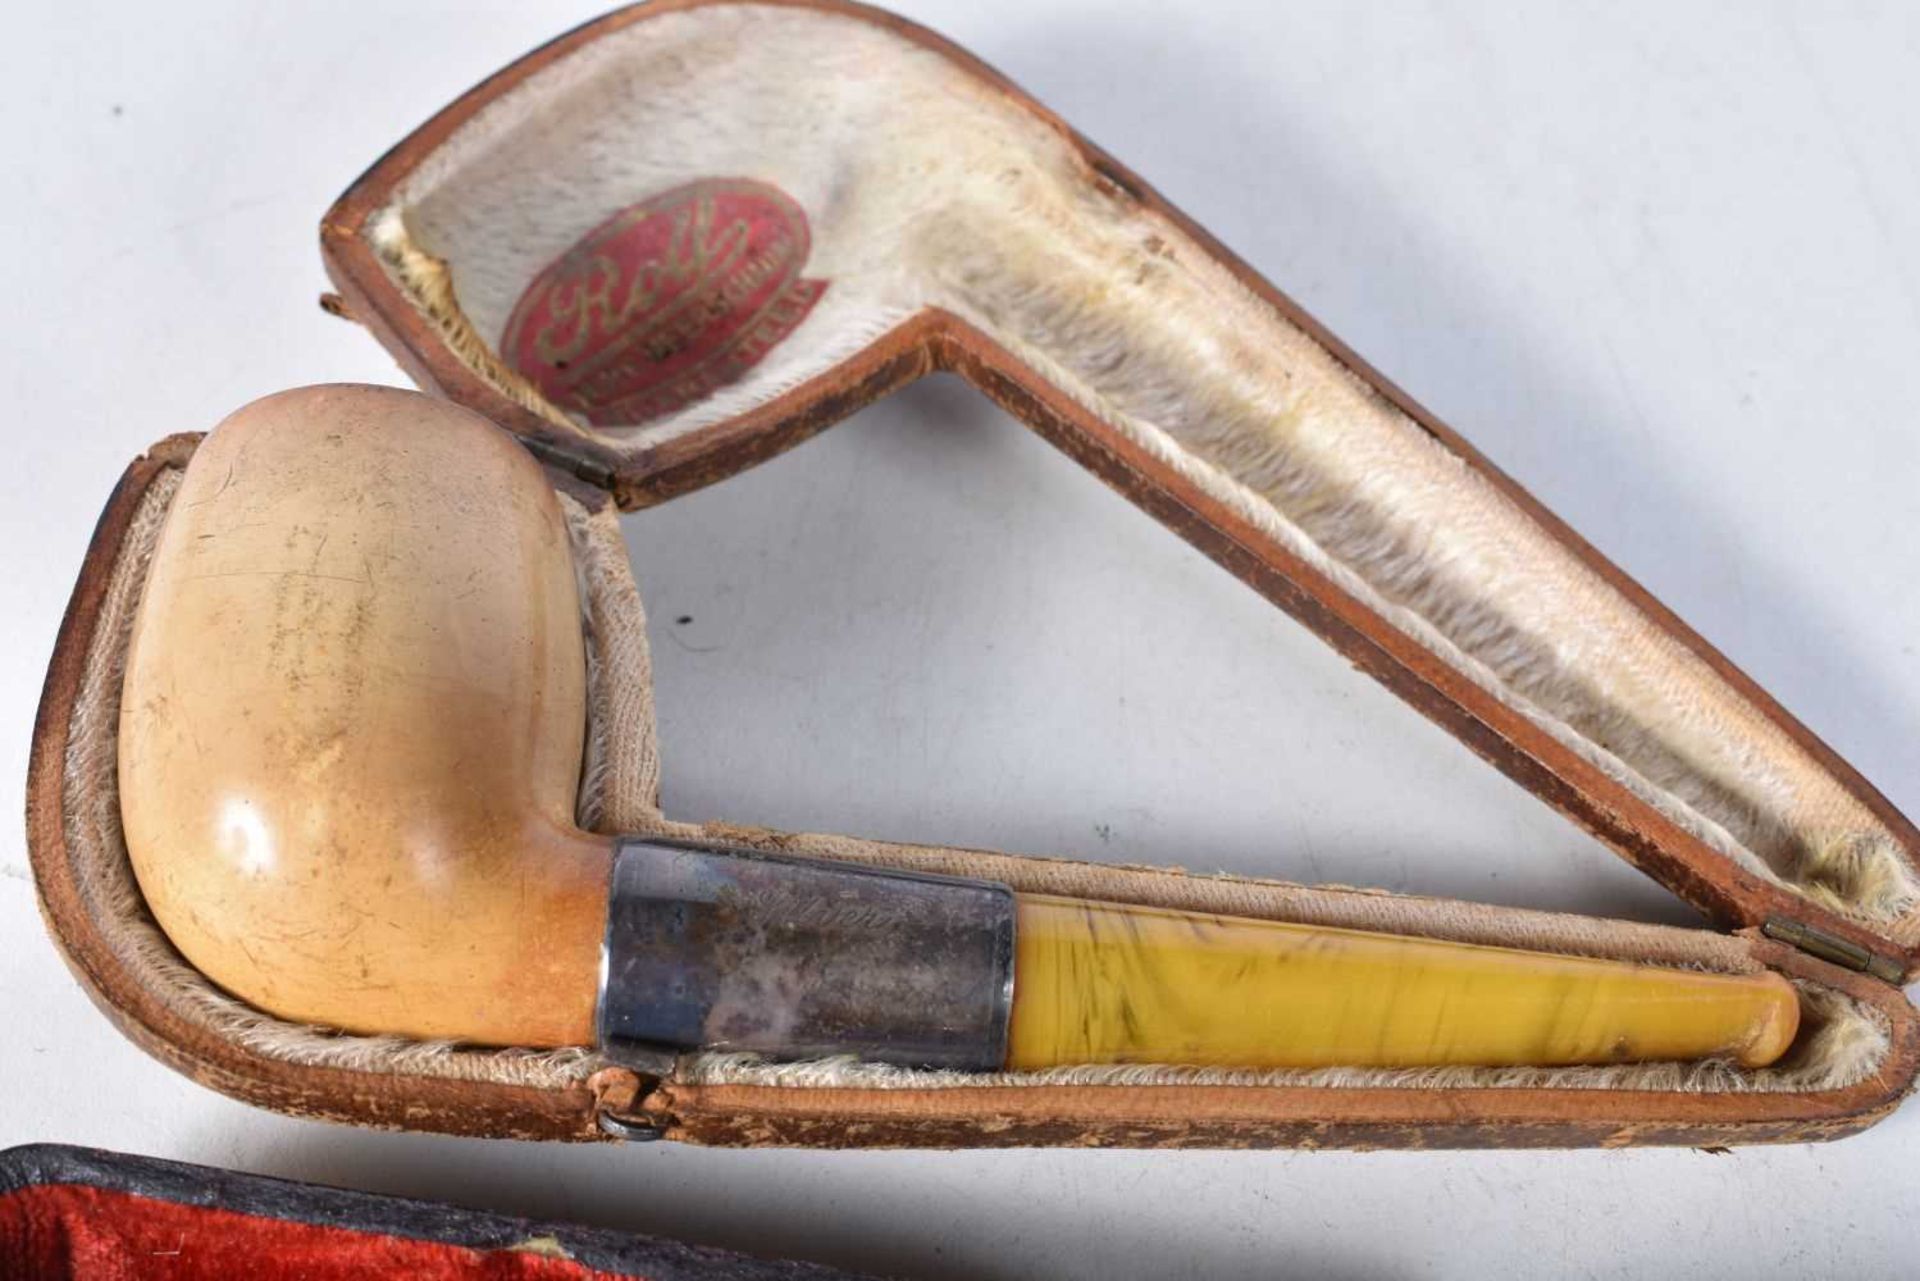 Tobacciana silver items including - A Cased Meerschaum Pipe with Silver Mounts and Amber Stem, A - Image 4 of 5